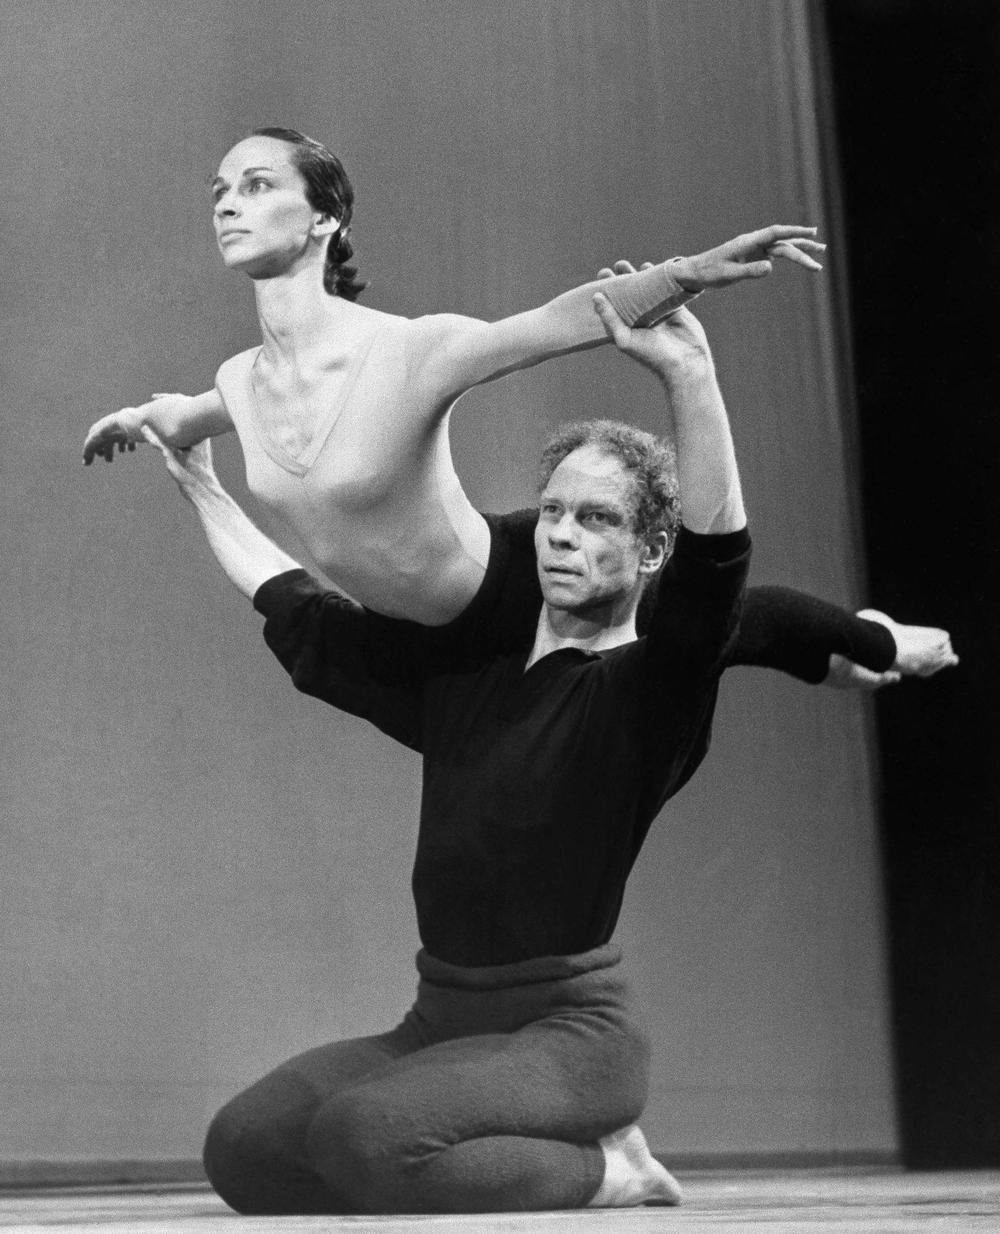 FILE- In This July 27, 1964 file photo, Merce Cunningham lifts Carolyn Brown during rehearsal at Sadler Wells Theater in London, England. On Tuesday, June 9, 2009, the Cunningham Dance Foundation announced that will close after a two-year international tour and New York performance, to document Cunningham's cutting-edge movements, along with sets and costumes, so they can be studied and performed when he can no longer lead his dance company. (AP)